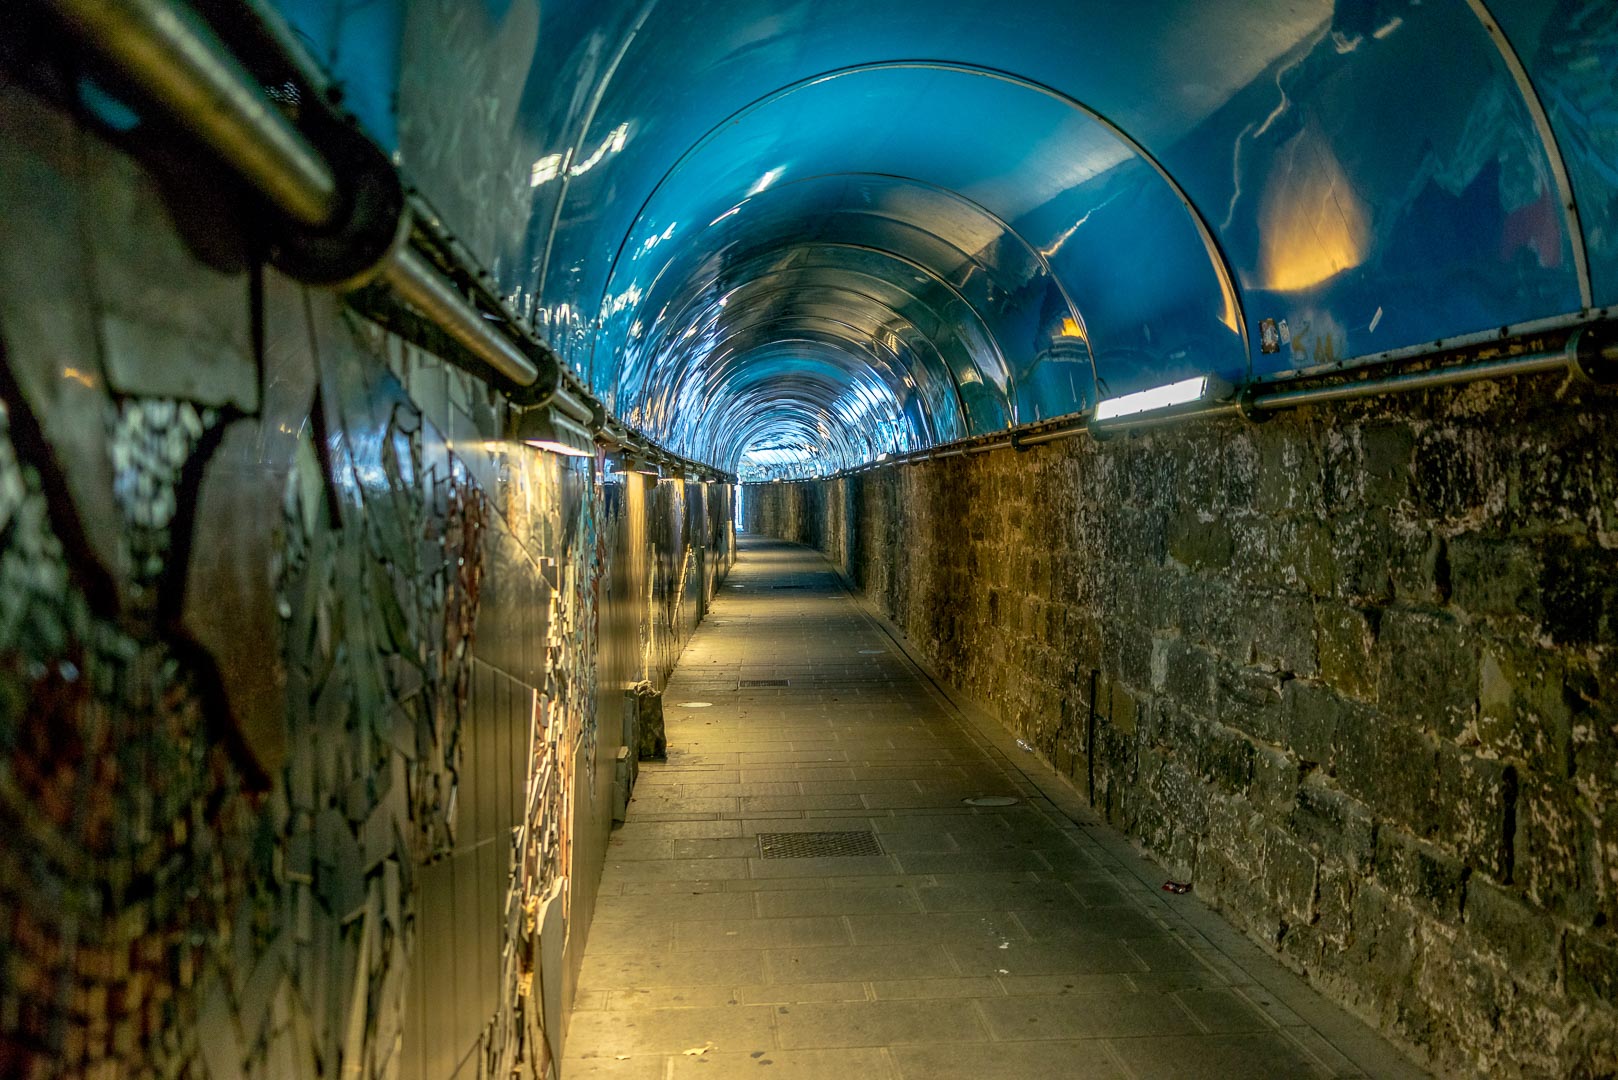 Backplate • ID: 5618 • HDRI Haven - Tunnel With Concrete Path 